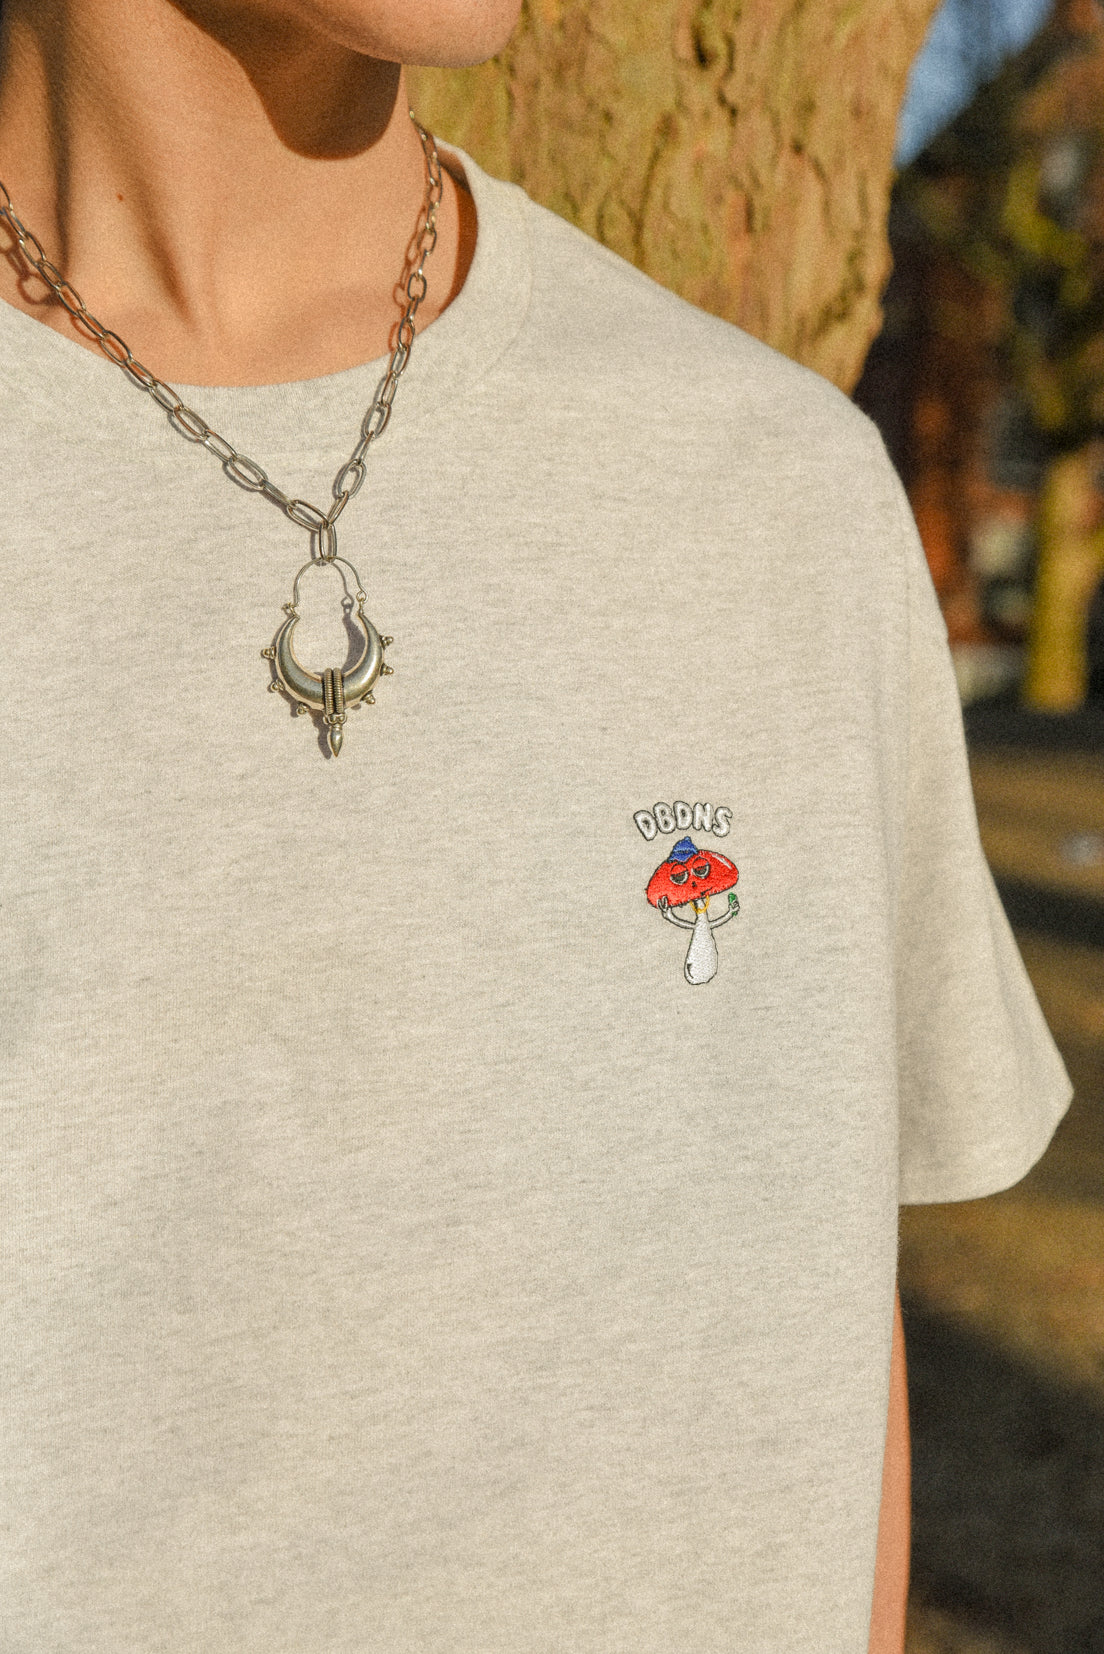 Short Sleeved T-shirt in Ash Grey with Sup Bro! Mushroom Embroidery